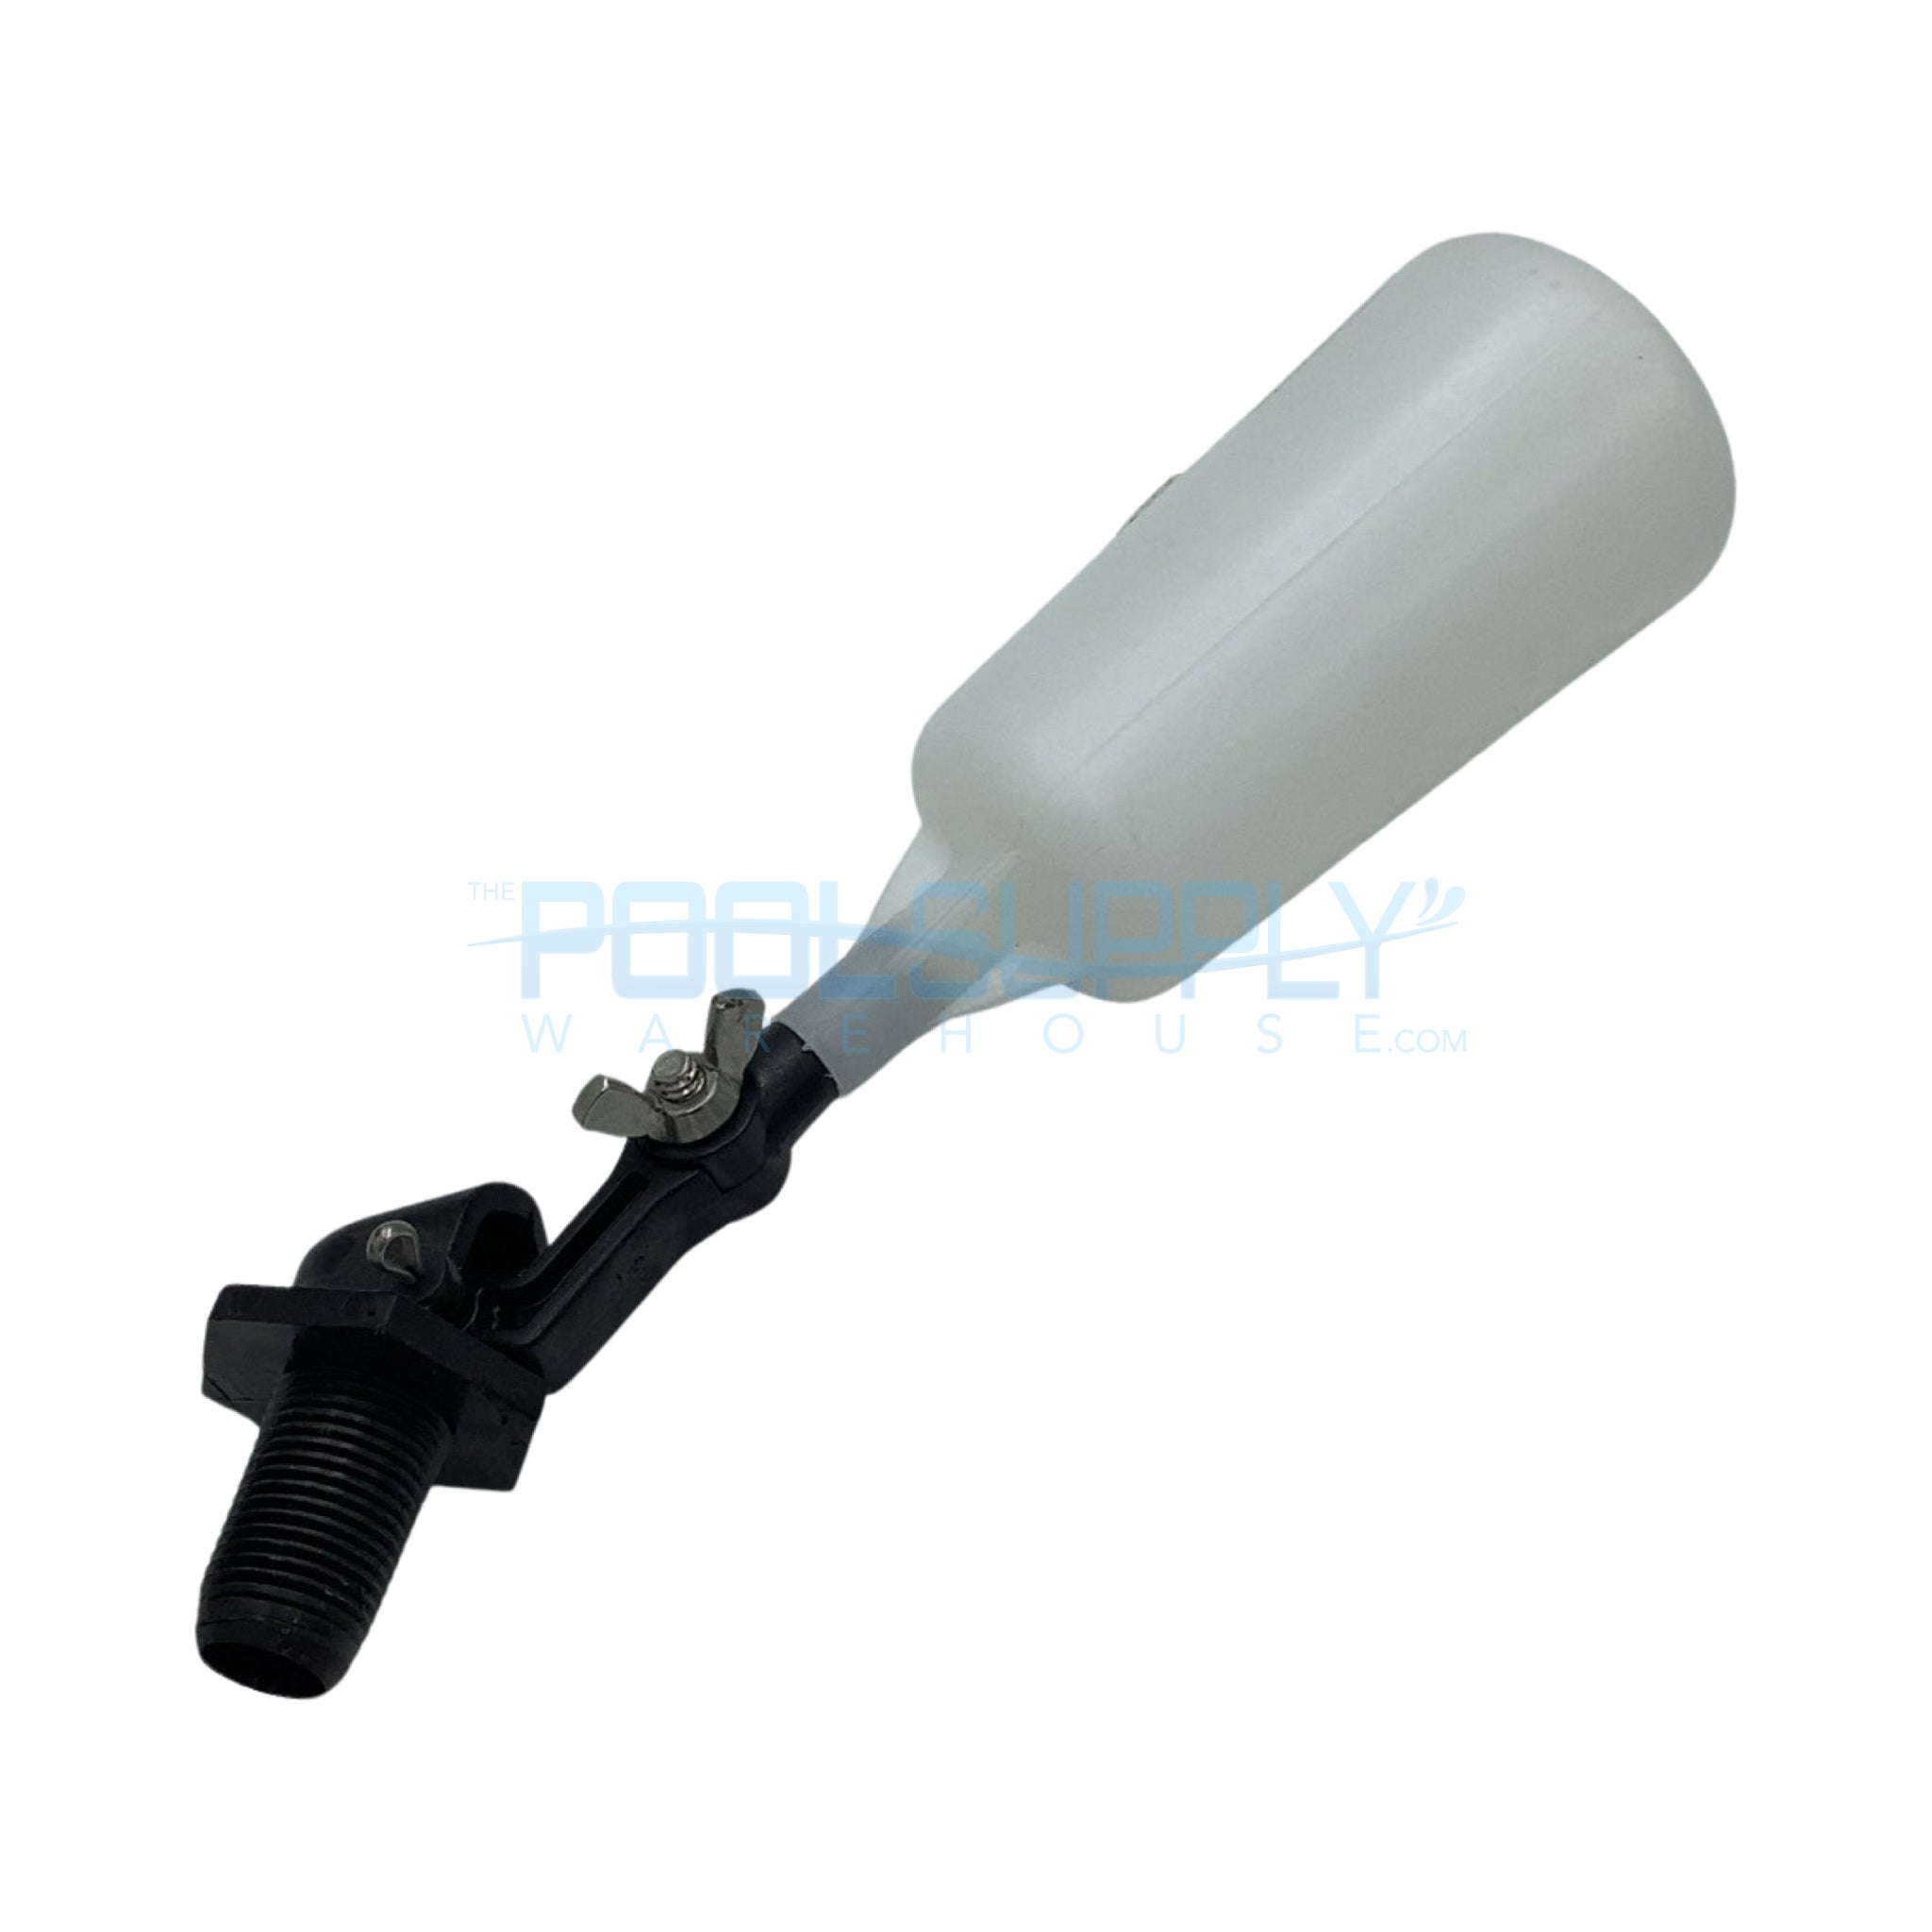 Stetson 3/8" MPT WaterLev Float Valve - 3/8 ATF - The Pool Supply Warehouse